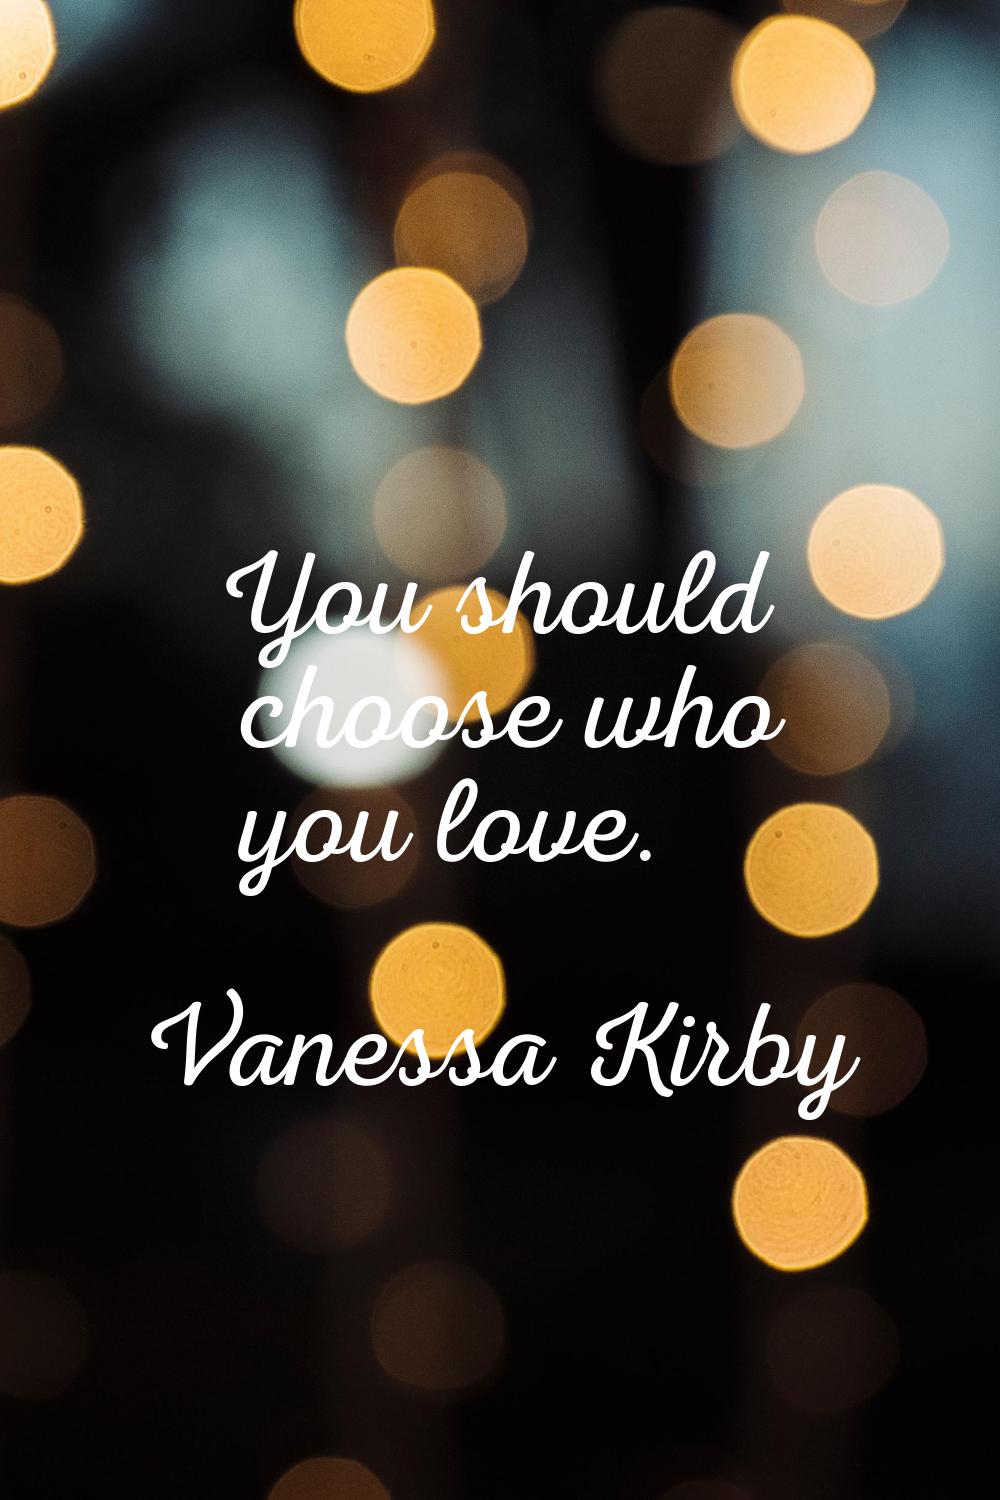 You should choose who you love.